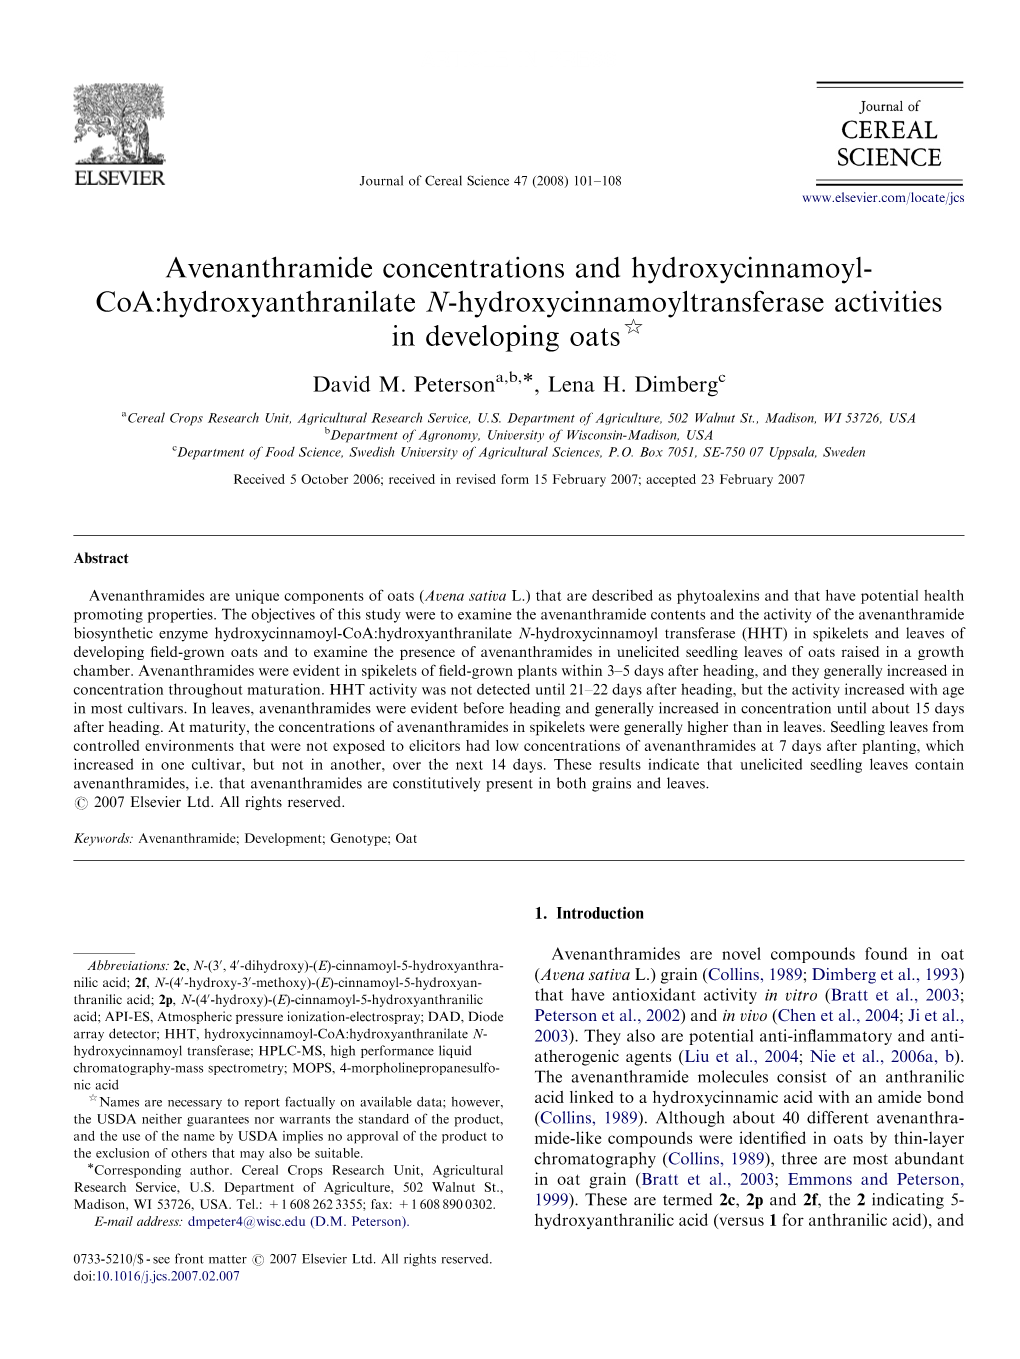 Avenanthramide Concentrations and Hydroxycinnamoyl- Coa:Hydroxyanthranilate N-Hydroxycinnamoyltransferase Activities in Developing Oats$